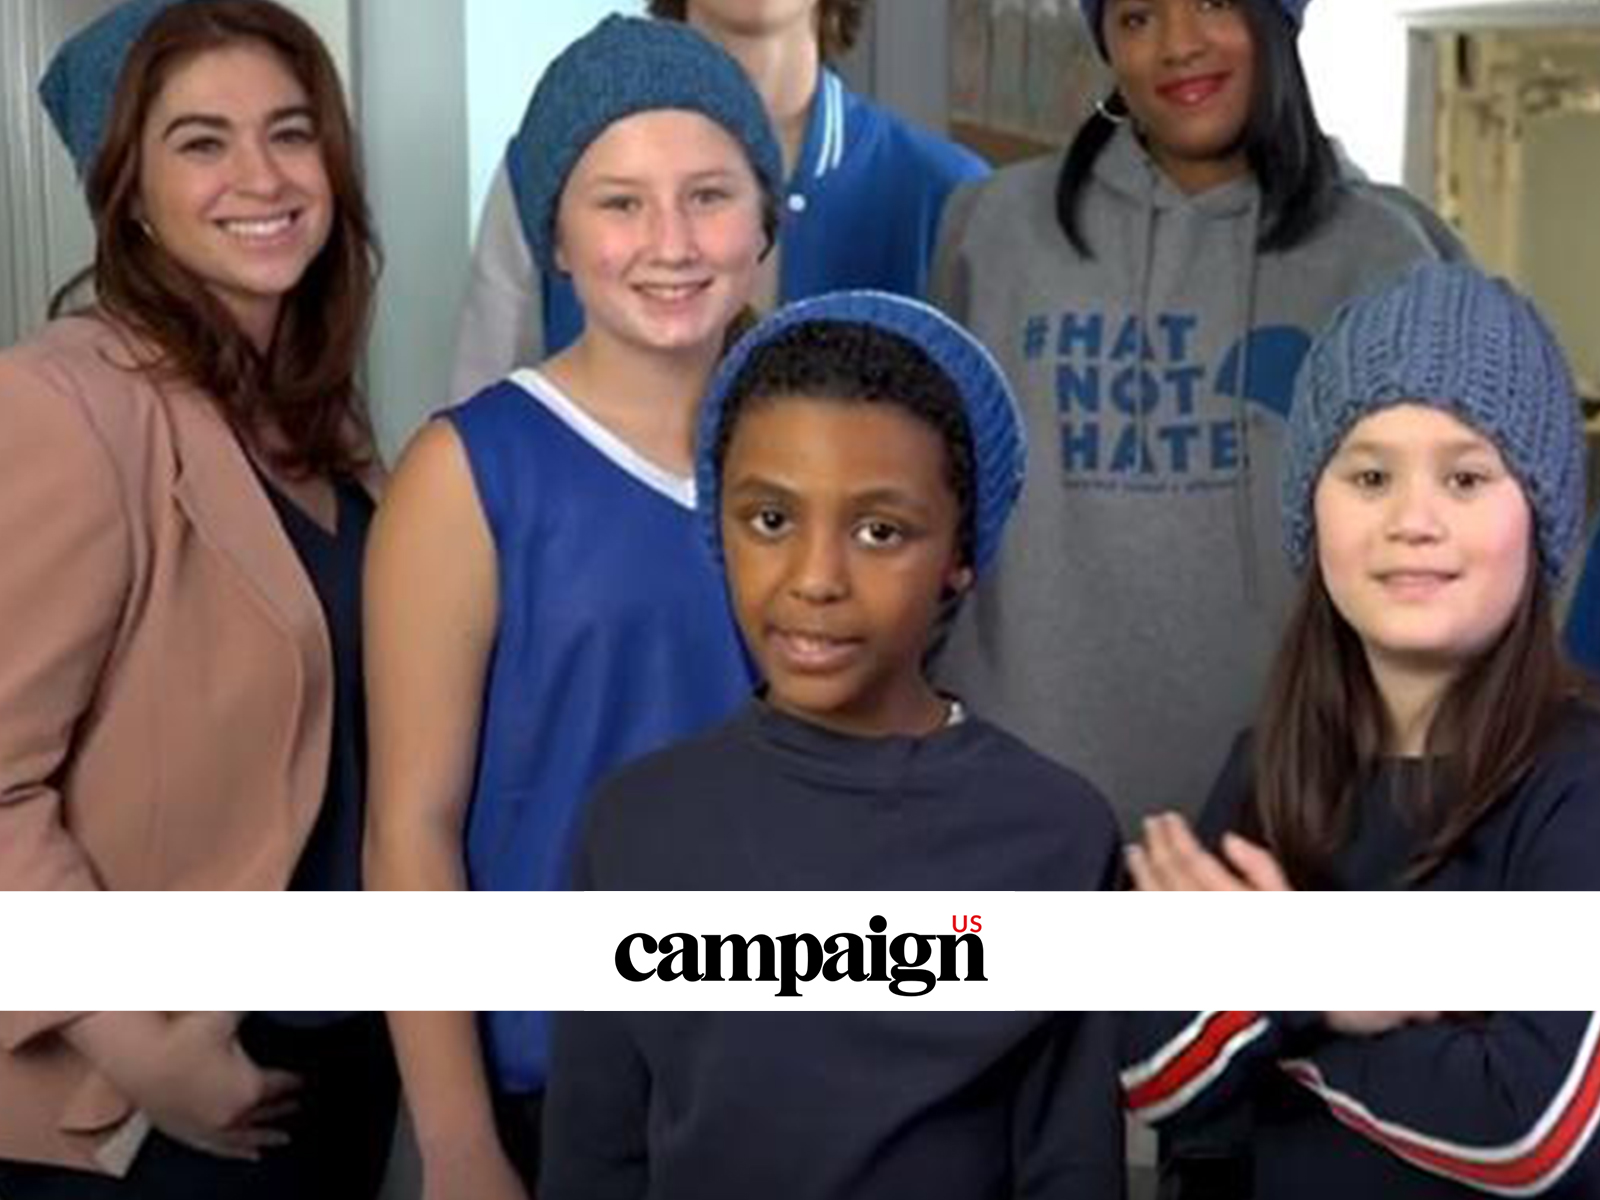 Campaign US logo overlaid on image of kids wearing blue hats